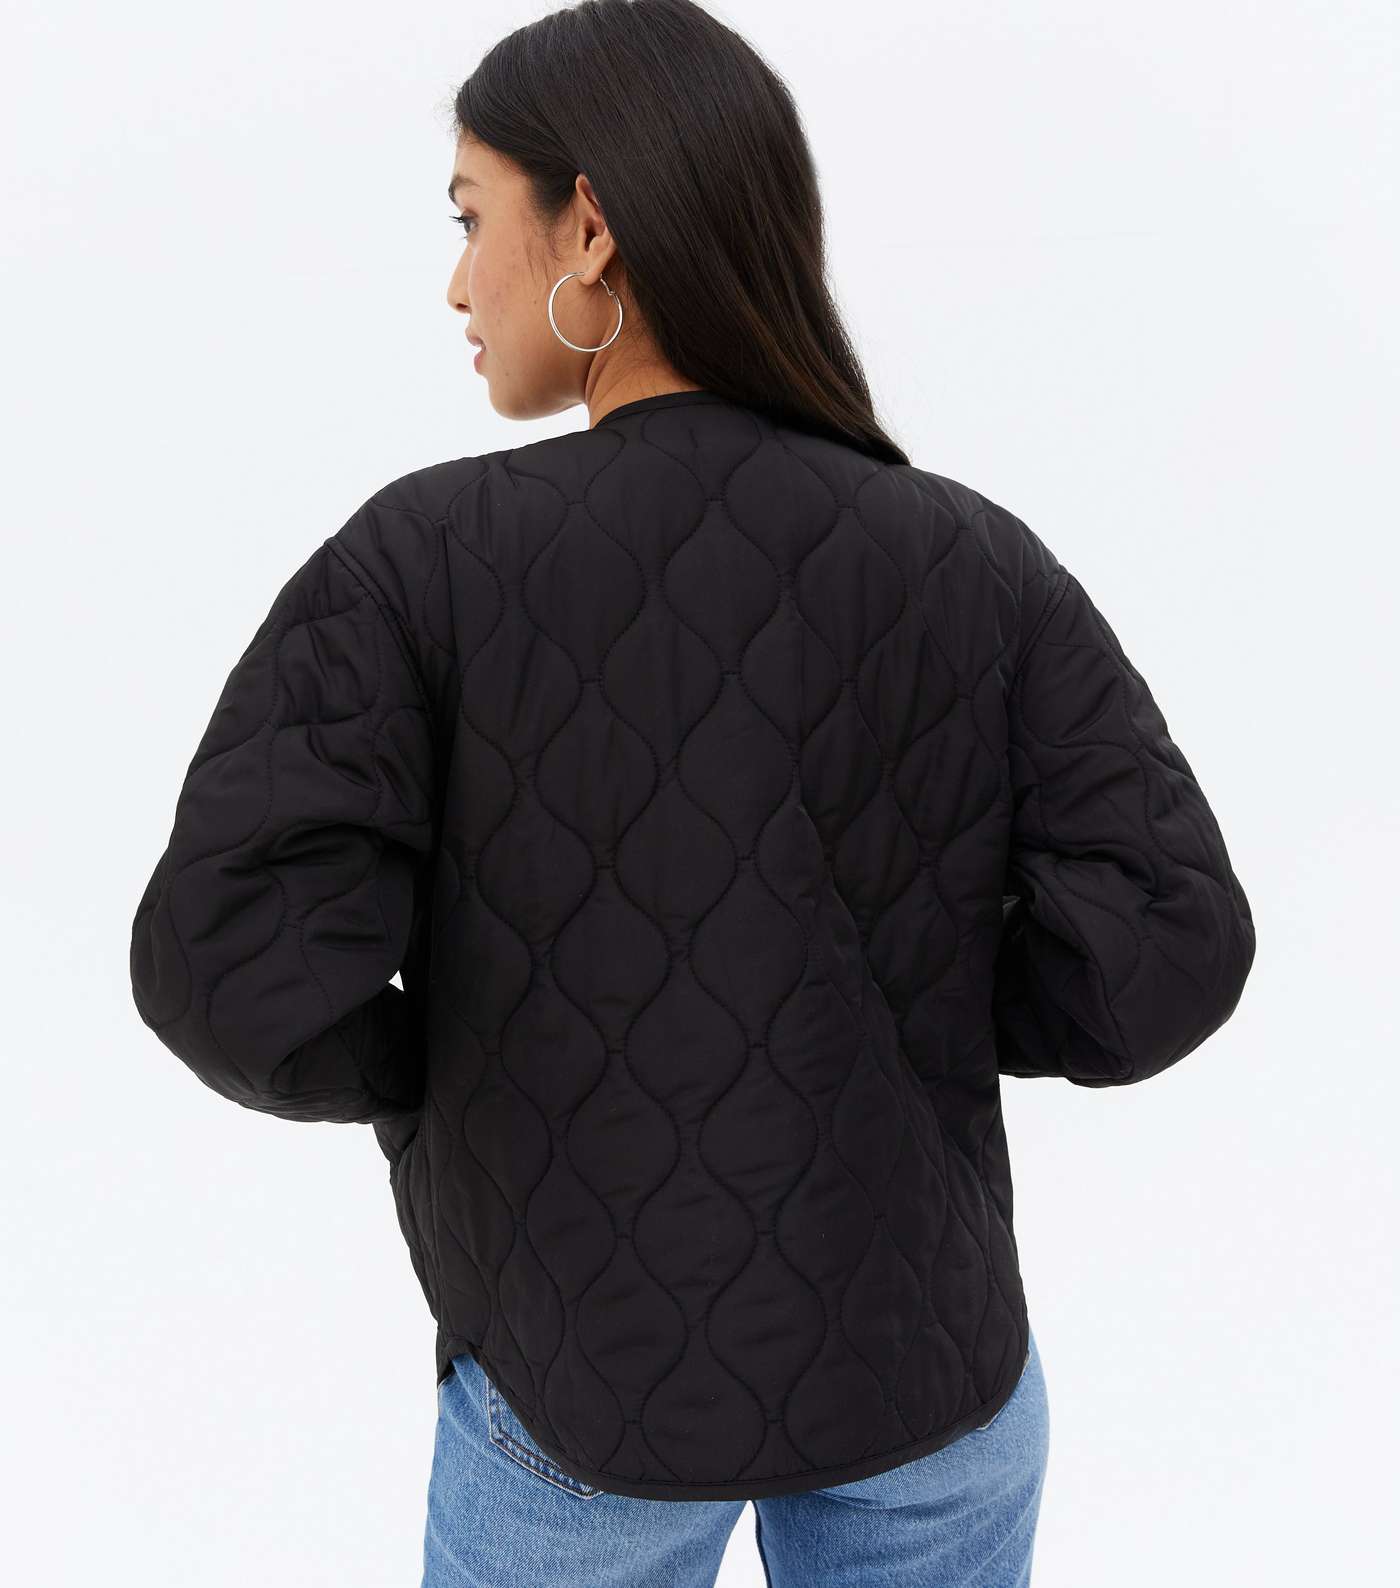 Petite Black Quilted Bomber Jacket Image 4